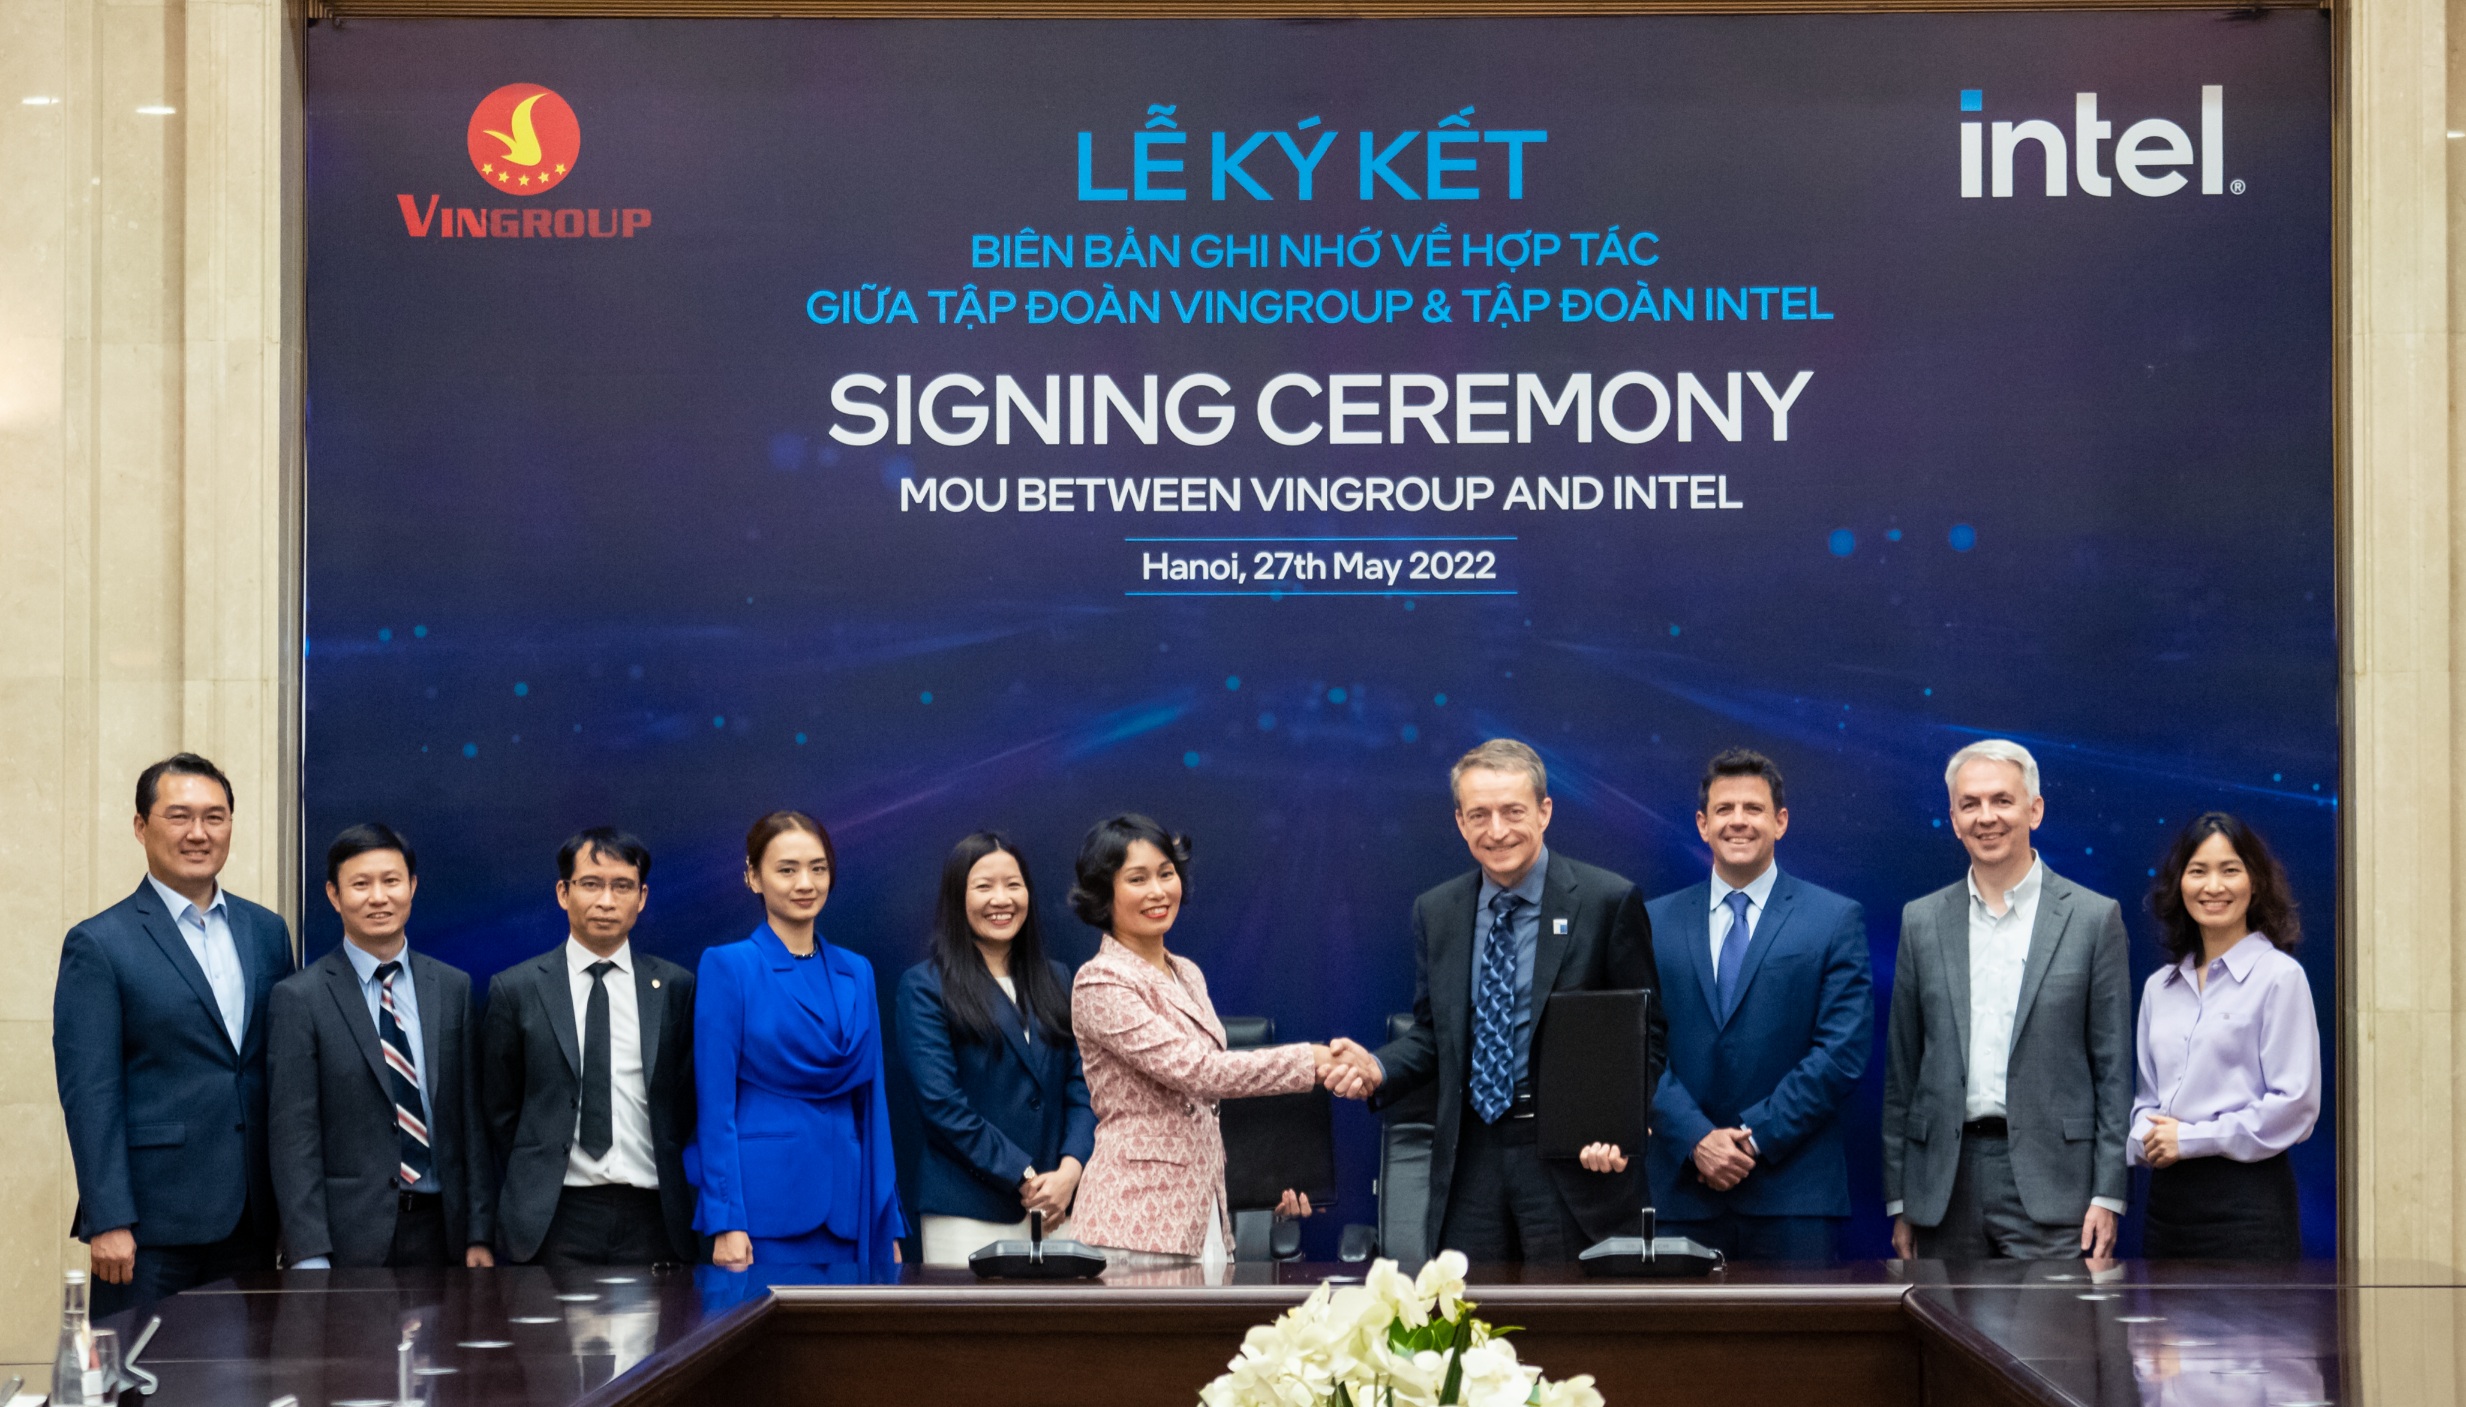 Madam Le Thi Thu Thuy, Vingroup Vice Chairwoman and Mr. Pat Gelsinger, Intel CEO at the signing ceremony.